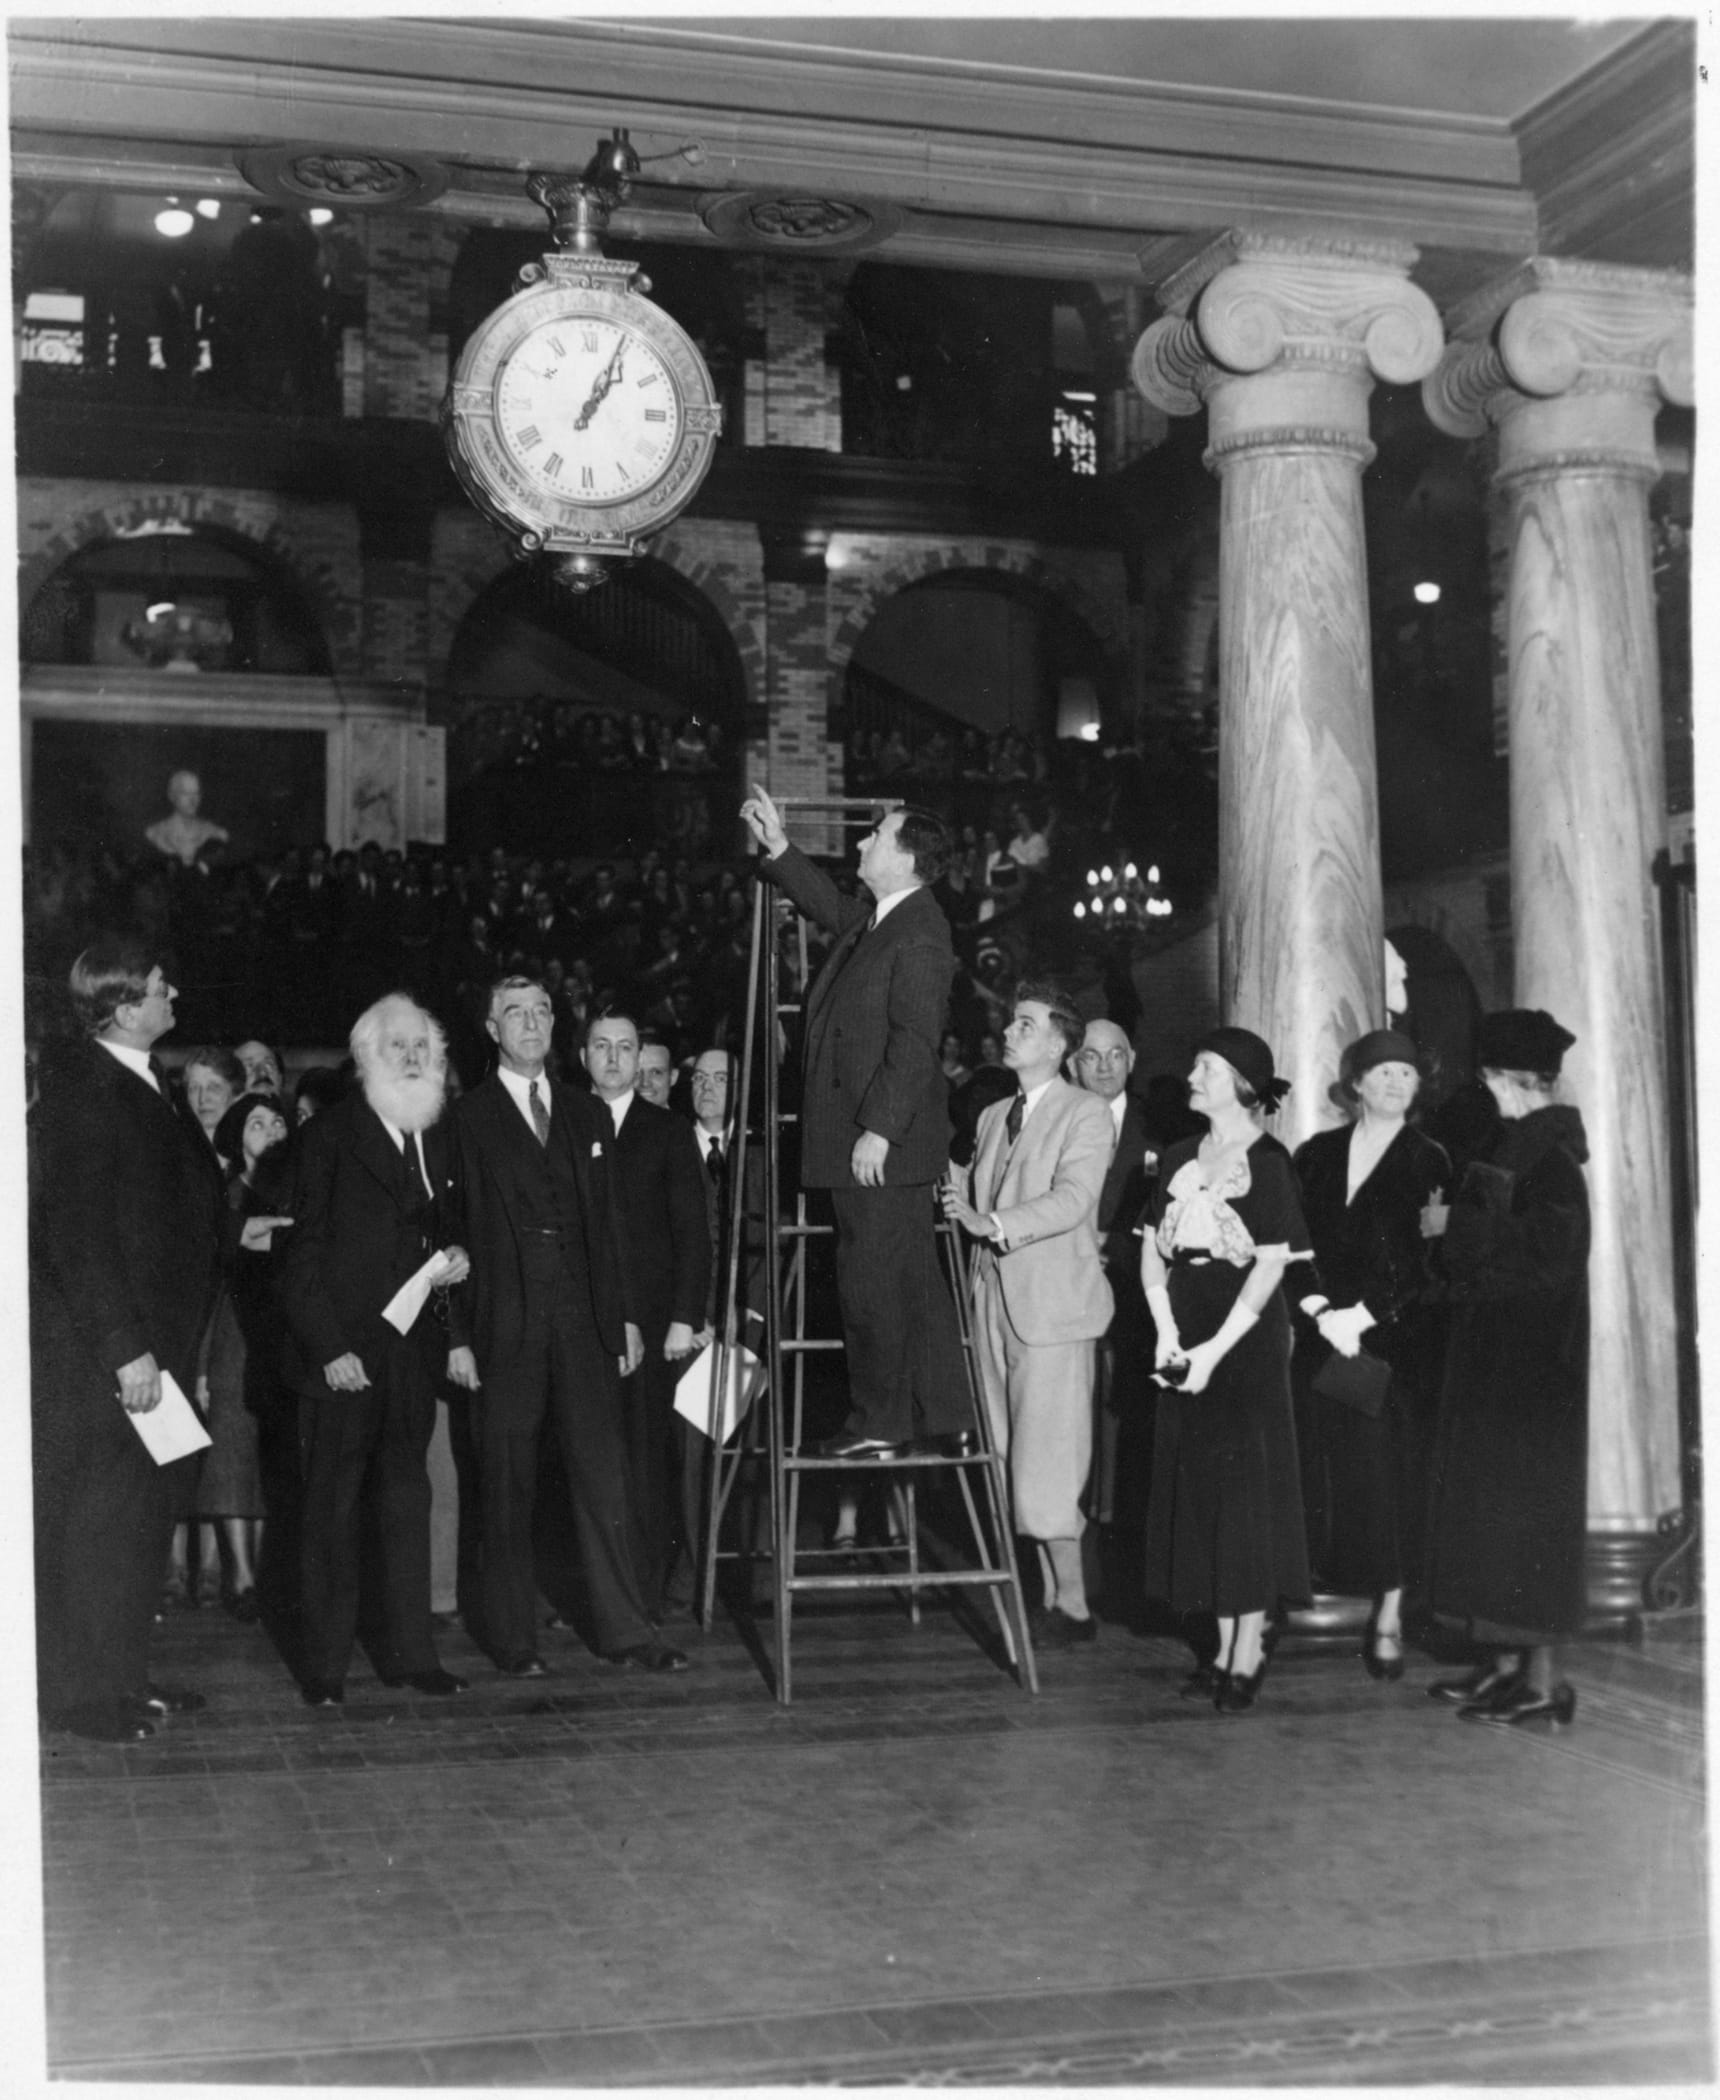 A photograph from the clock's 1932 dedication ceremony. Photo courtesy University Archives.